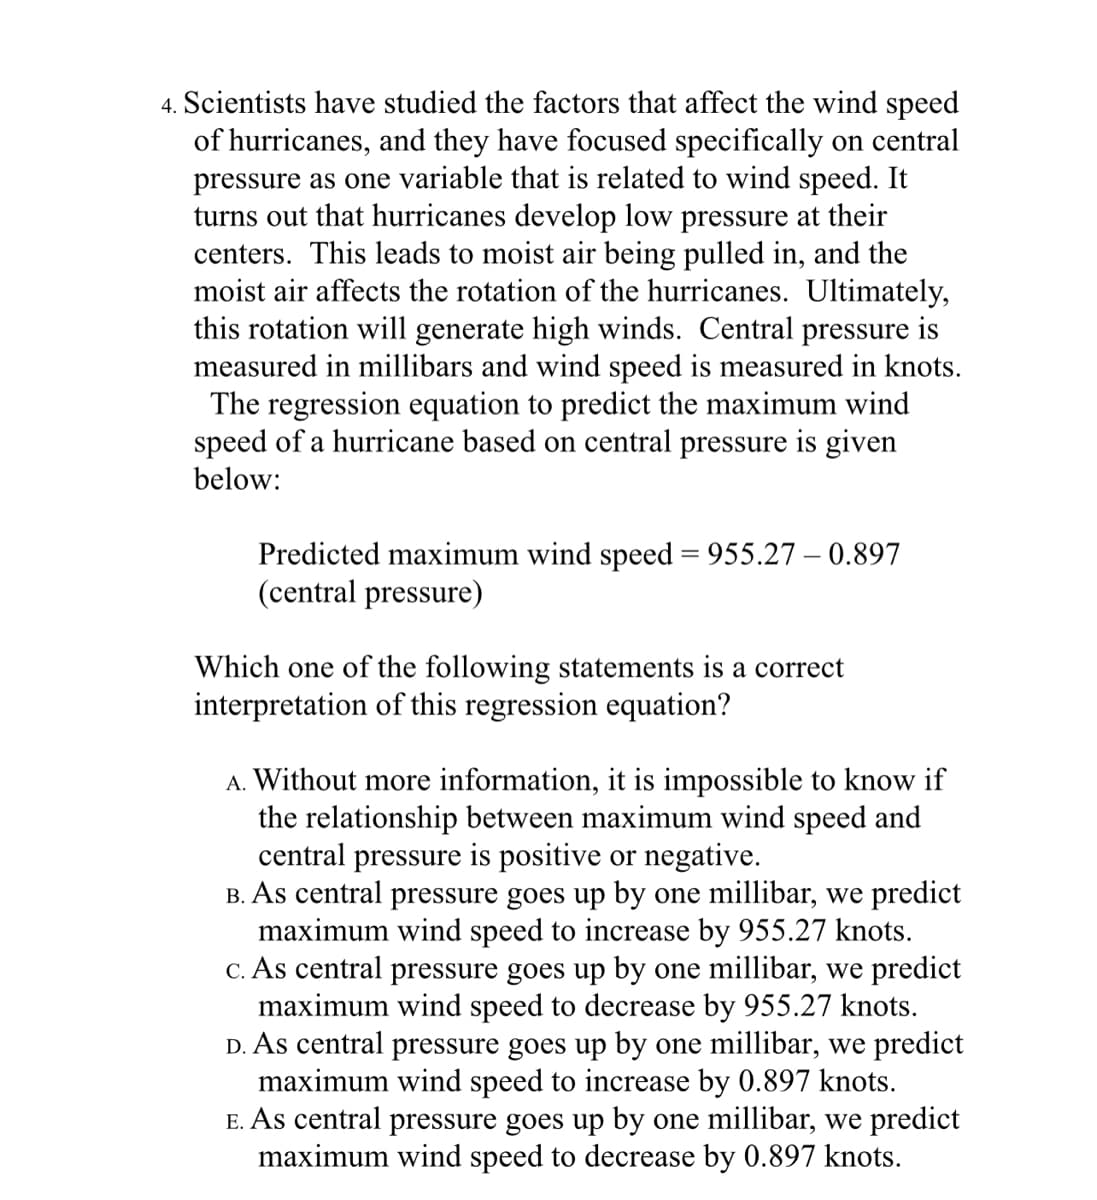 4. Scientists have studied the factors that affect the wind speed
of hurricanes, and they have focused specifically on central
pressure as one variable that is related to wind speed. It
turns out that hurricanes develop low pressure at their
centers. This leads to moist air being pulled in, and the
moist air affects the rotation of the hurricanes. Ultimately,
this rotation will generate high winds. Central pressure is
measured in millibars and wind speed is measured in knots.
The regression equation to predict the maximum wind
speed of a hurricane based on central pressure is given
below:
Predicted maximum wind speed = 955.27 – 0.897
(central pressure)
Which one of the following statements is a correct
interpretation of this regression equation?
A. Without more information, it is impossible to know if
the relationship between maximum wind speed and
central pressure is positive or negative.
B. As central pressure goes up by one millibar, we predict
maximum wind speed to increase by 955.27 knots.
C. As central pressure goes up by one millibar, we predict
maximum wind speed to decrease by 955.27 knots.
D. As central pressure goes up by one millibar, we predict
maximum wind speed to increase by 0.897 knots.
E. As central pressure goes up by one millibar, we predict
maximum wind speed to decrease by 0.897 knots.
